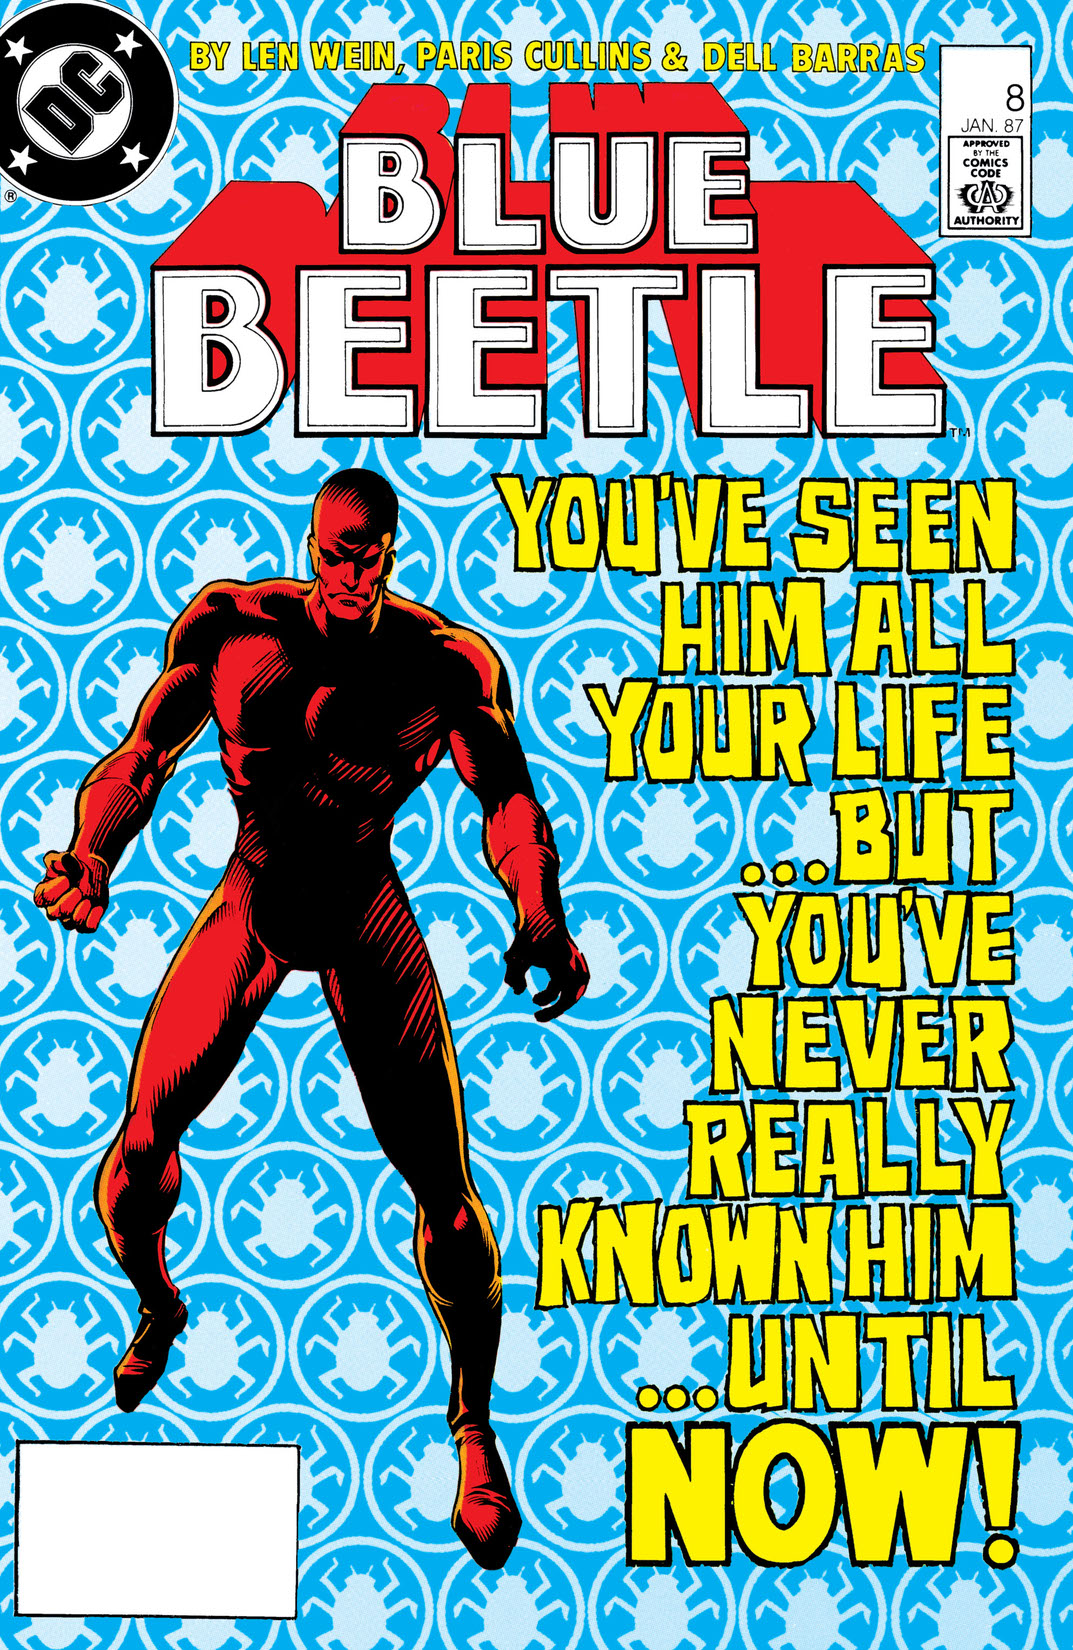 Blue Beetle (1986-) #8 preview images